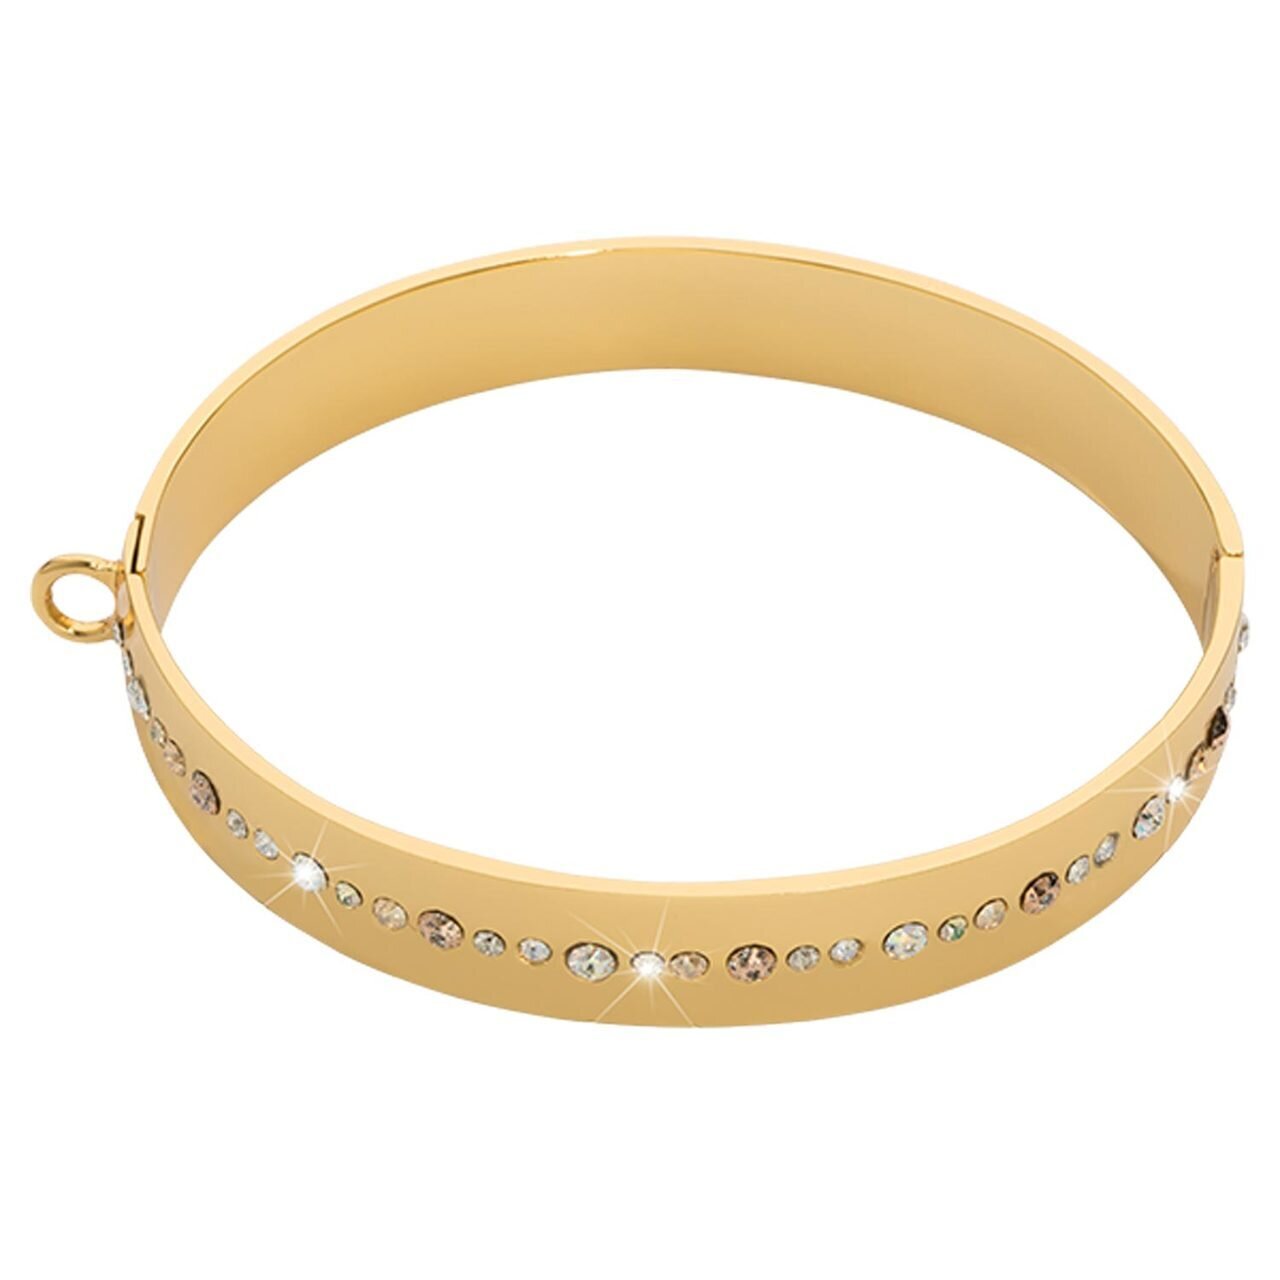 Nikki Lissoni Bangle of 1cm with Clear Peach Swarovski Crystals One Loop To Attach A Charm Gold-plated In 17cm B1124G17